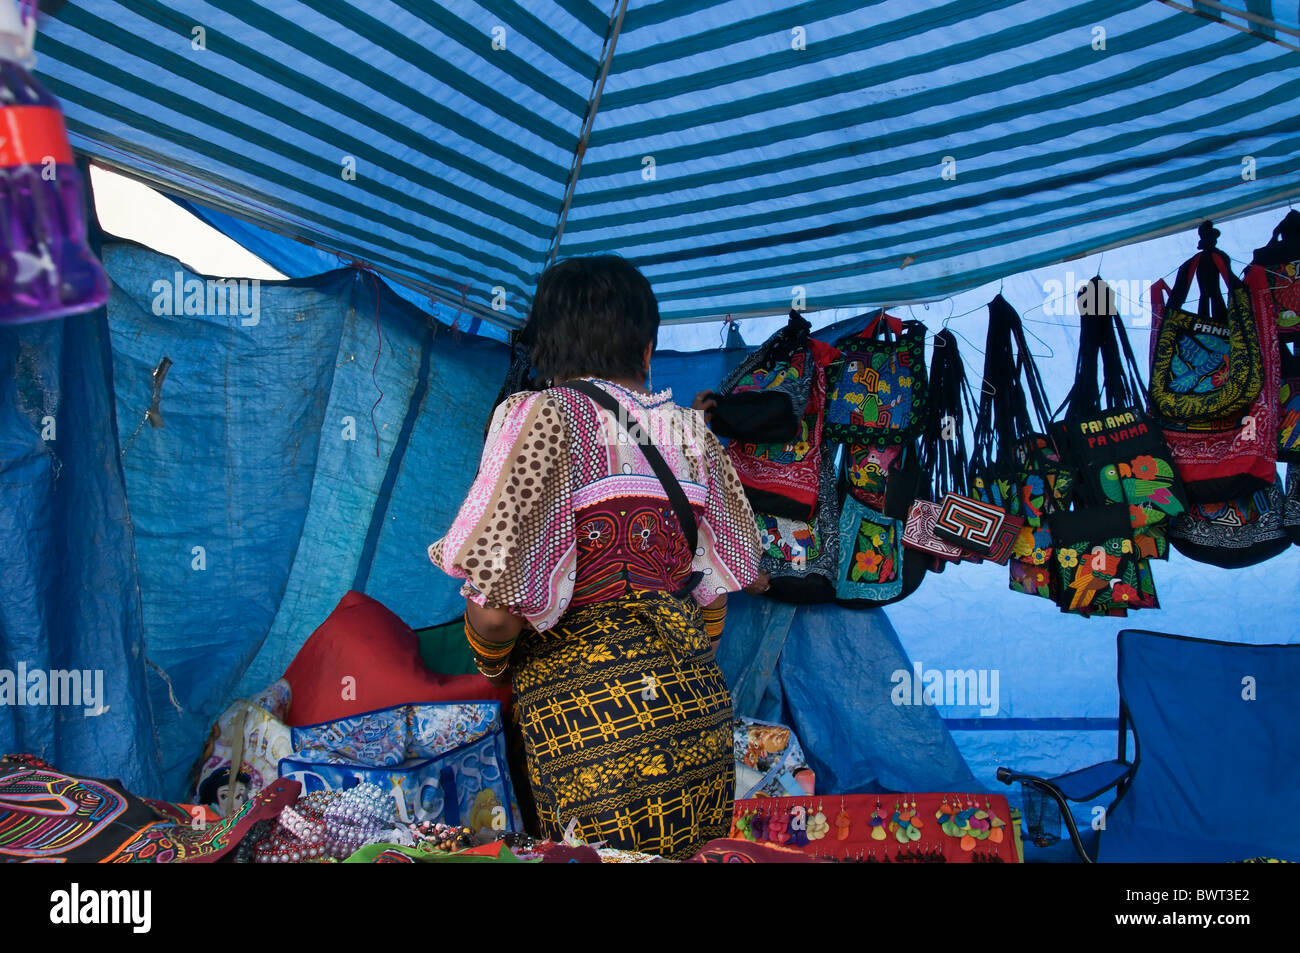 A Kuna woman in traditional costume sells handicrafts made from molas at a covered stall in Pedasi, Panama. Stock Photo